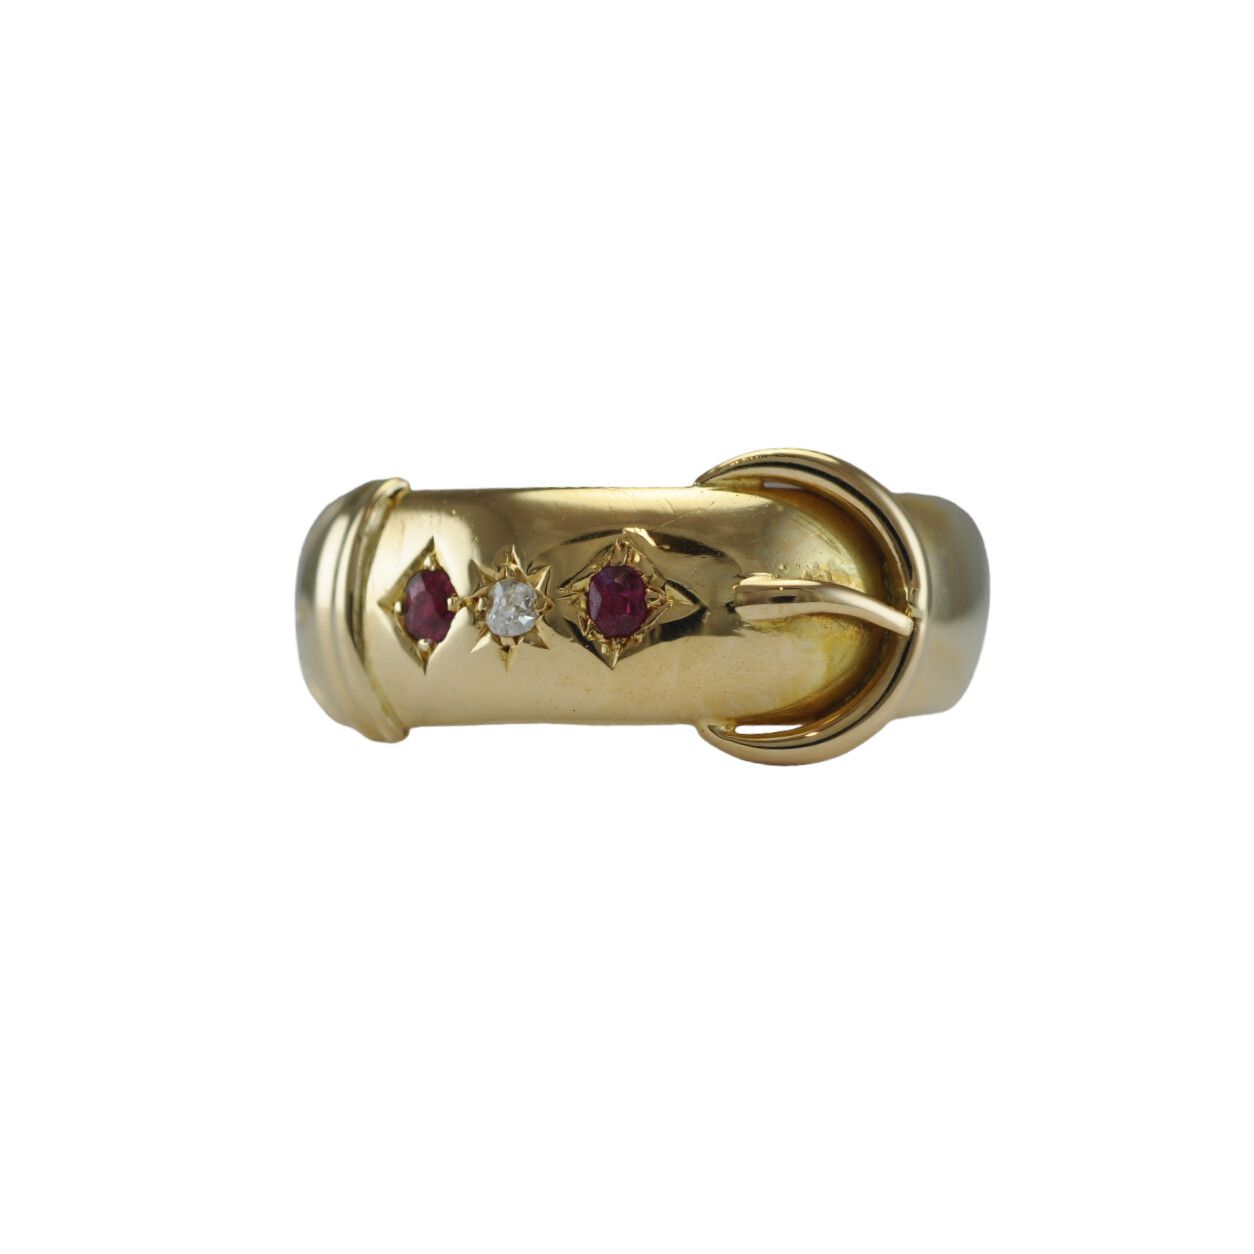 Heavy 18ct Gold Buckle Ring